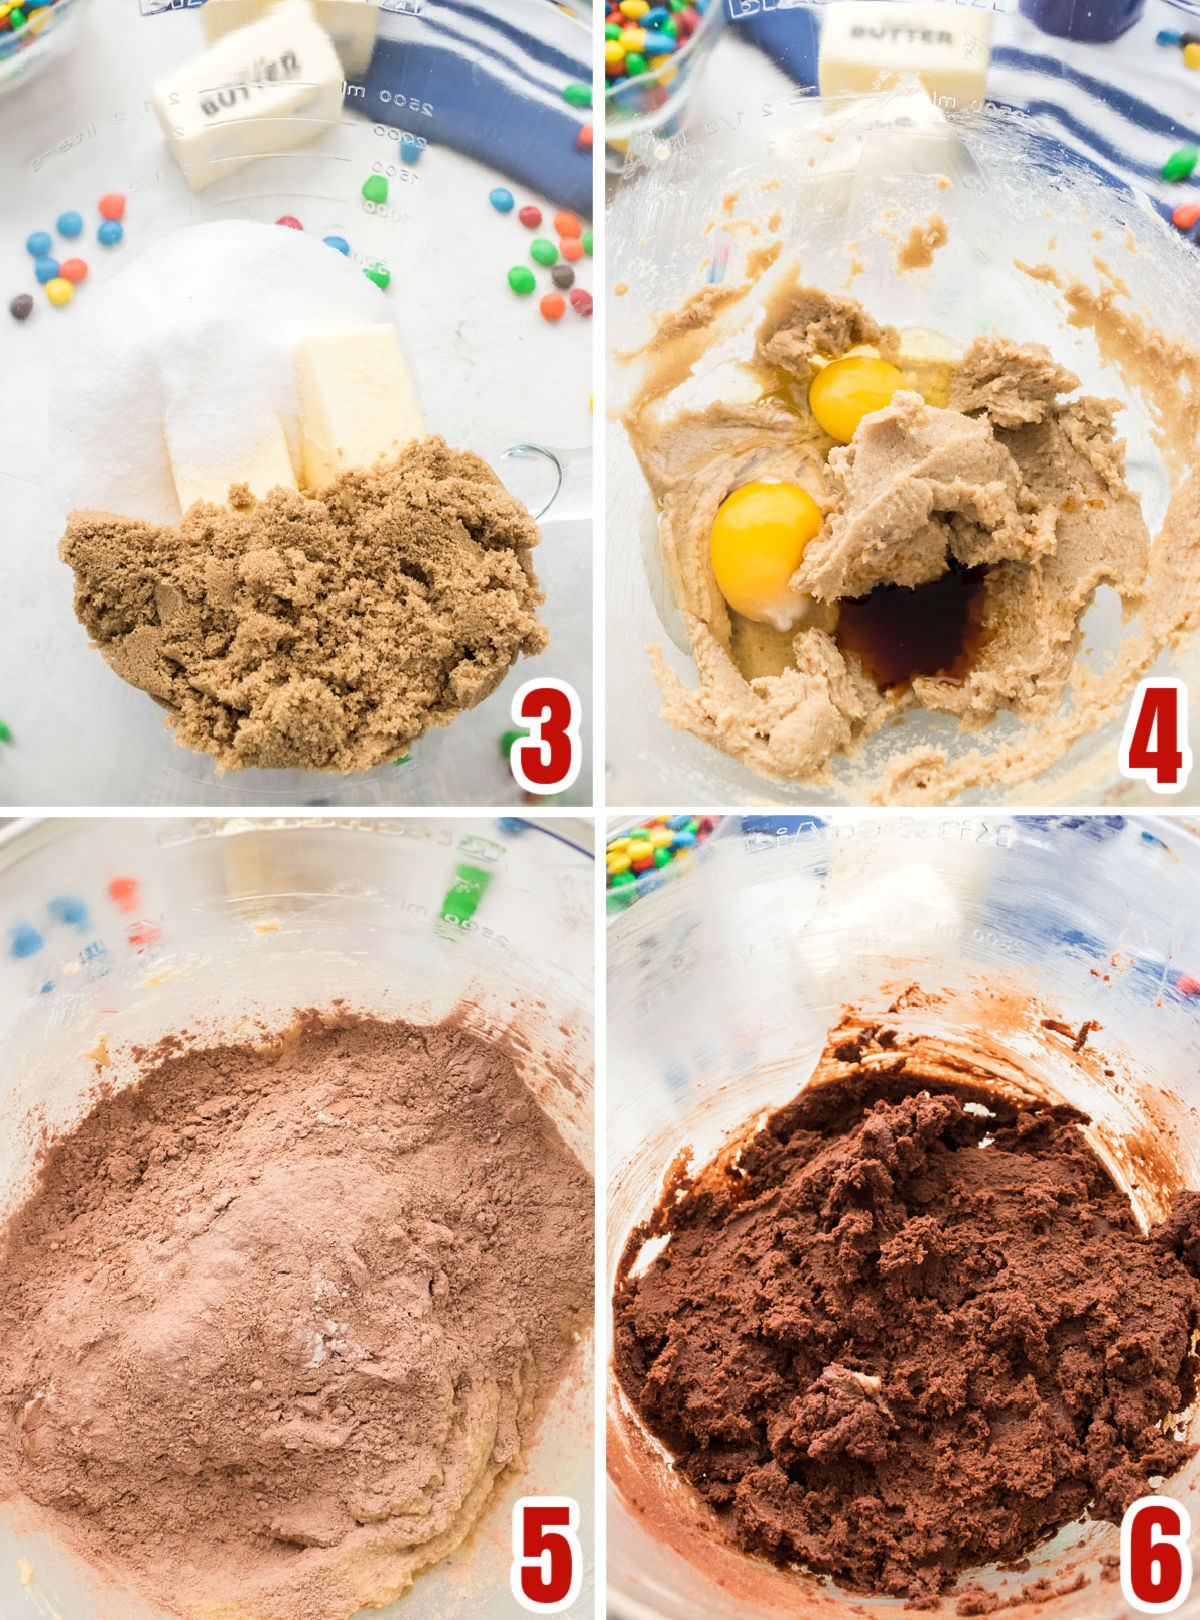 Collage image showing the steps for making the Chocolate M&M Cookie dough.